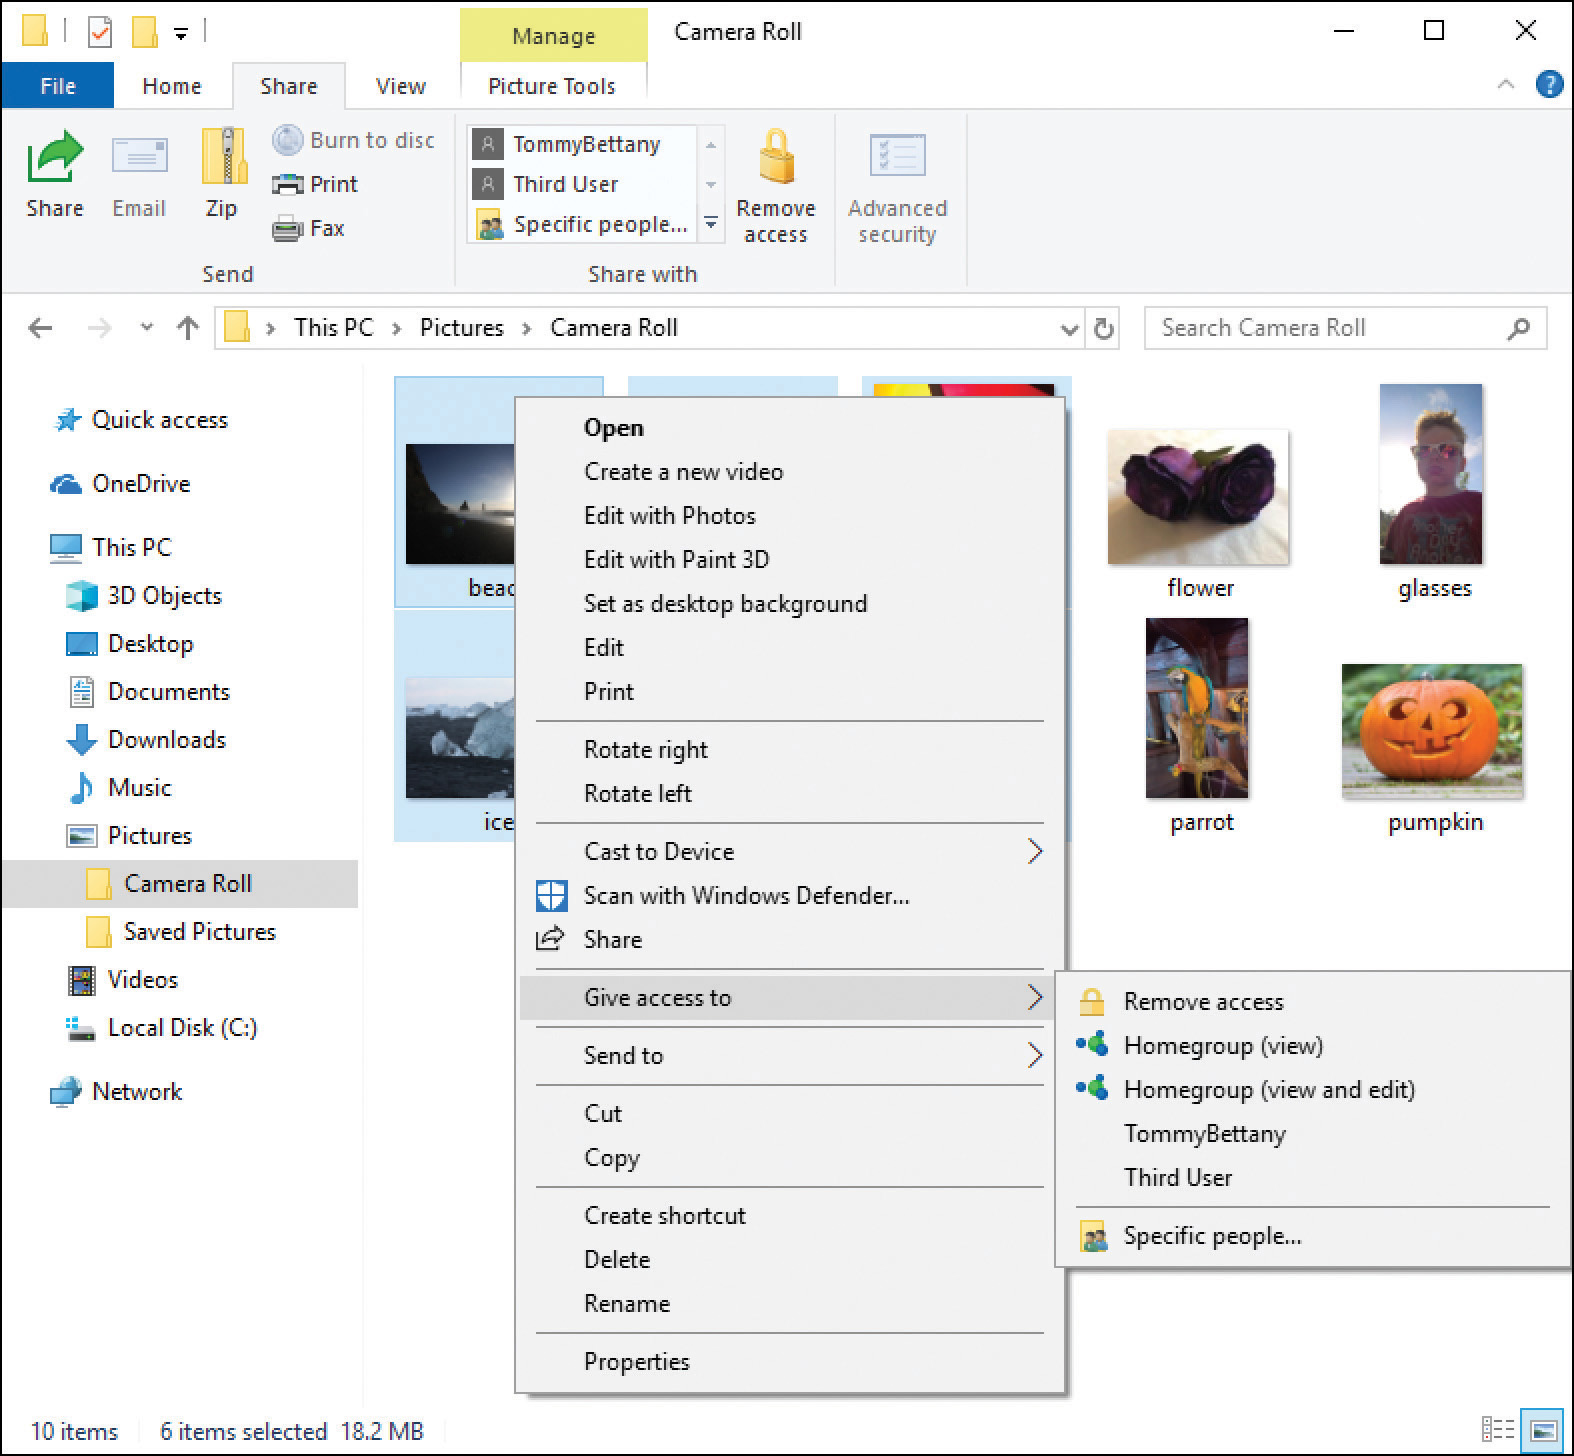 A screenshot shows the File Explorer with the Camera Roll folder selected and several photographs selected. The context menu is shown in the foreground with Give Access To selected, with the options Remove Access, Homegroup (View), Homegroup (View And Edit), TommyBettany, Third User, and Specific People.